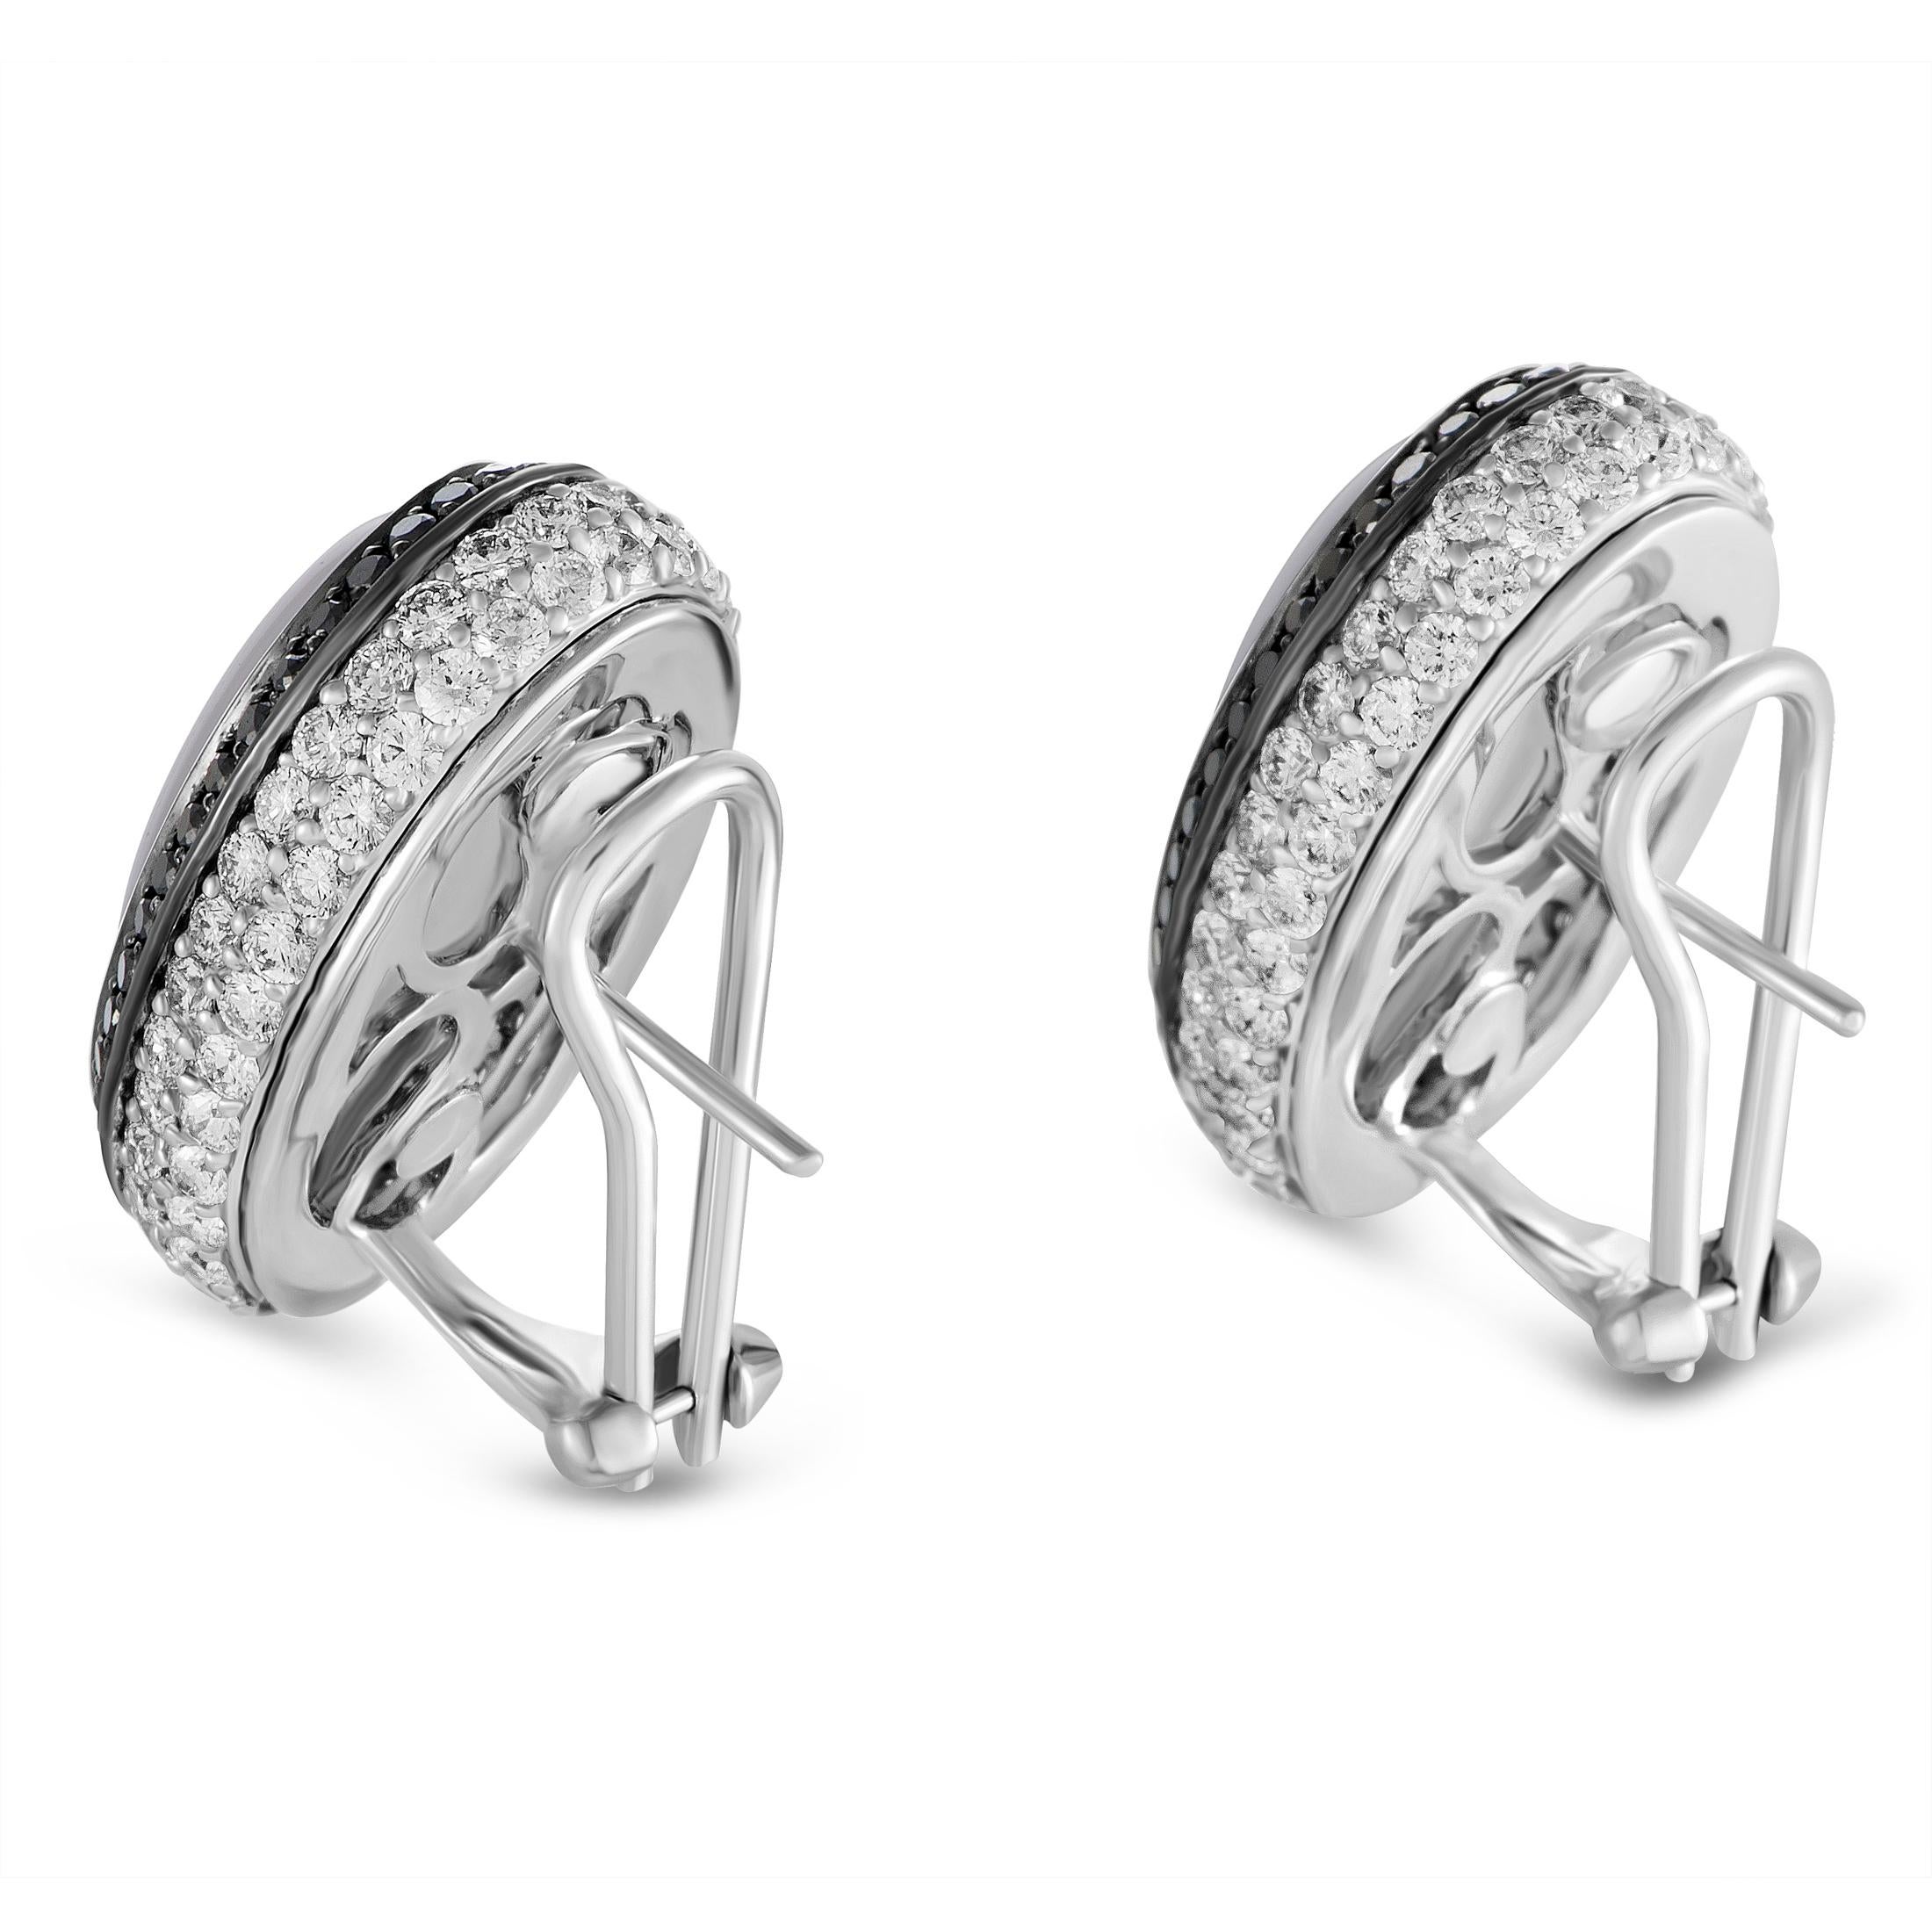 If you wish to accentuate your ensembles in a distinctly sophisticated fashion then these splendidly classy earrings are an exquisite choice. The earrings are designed by Luca Carati and the pair is made of elegant 18K white gold, embellished with